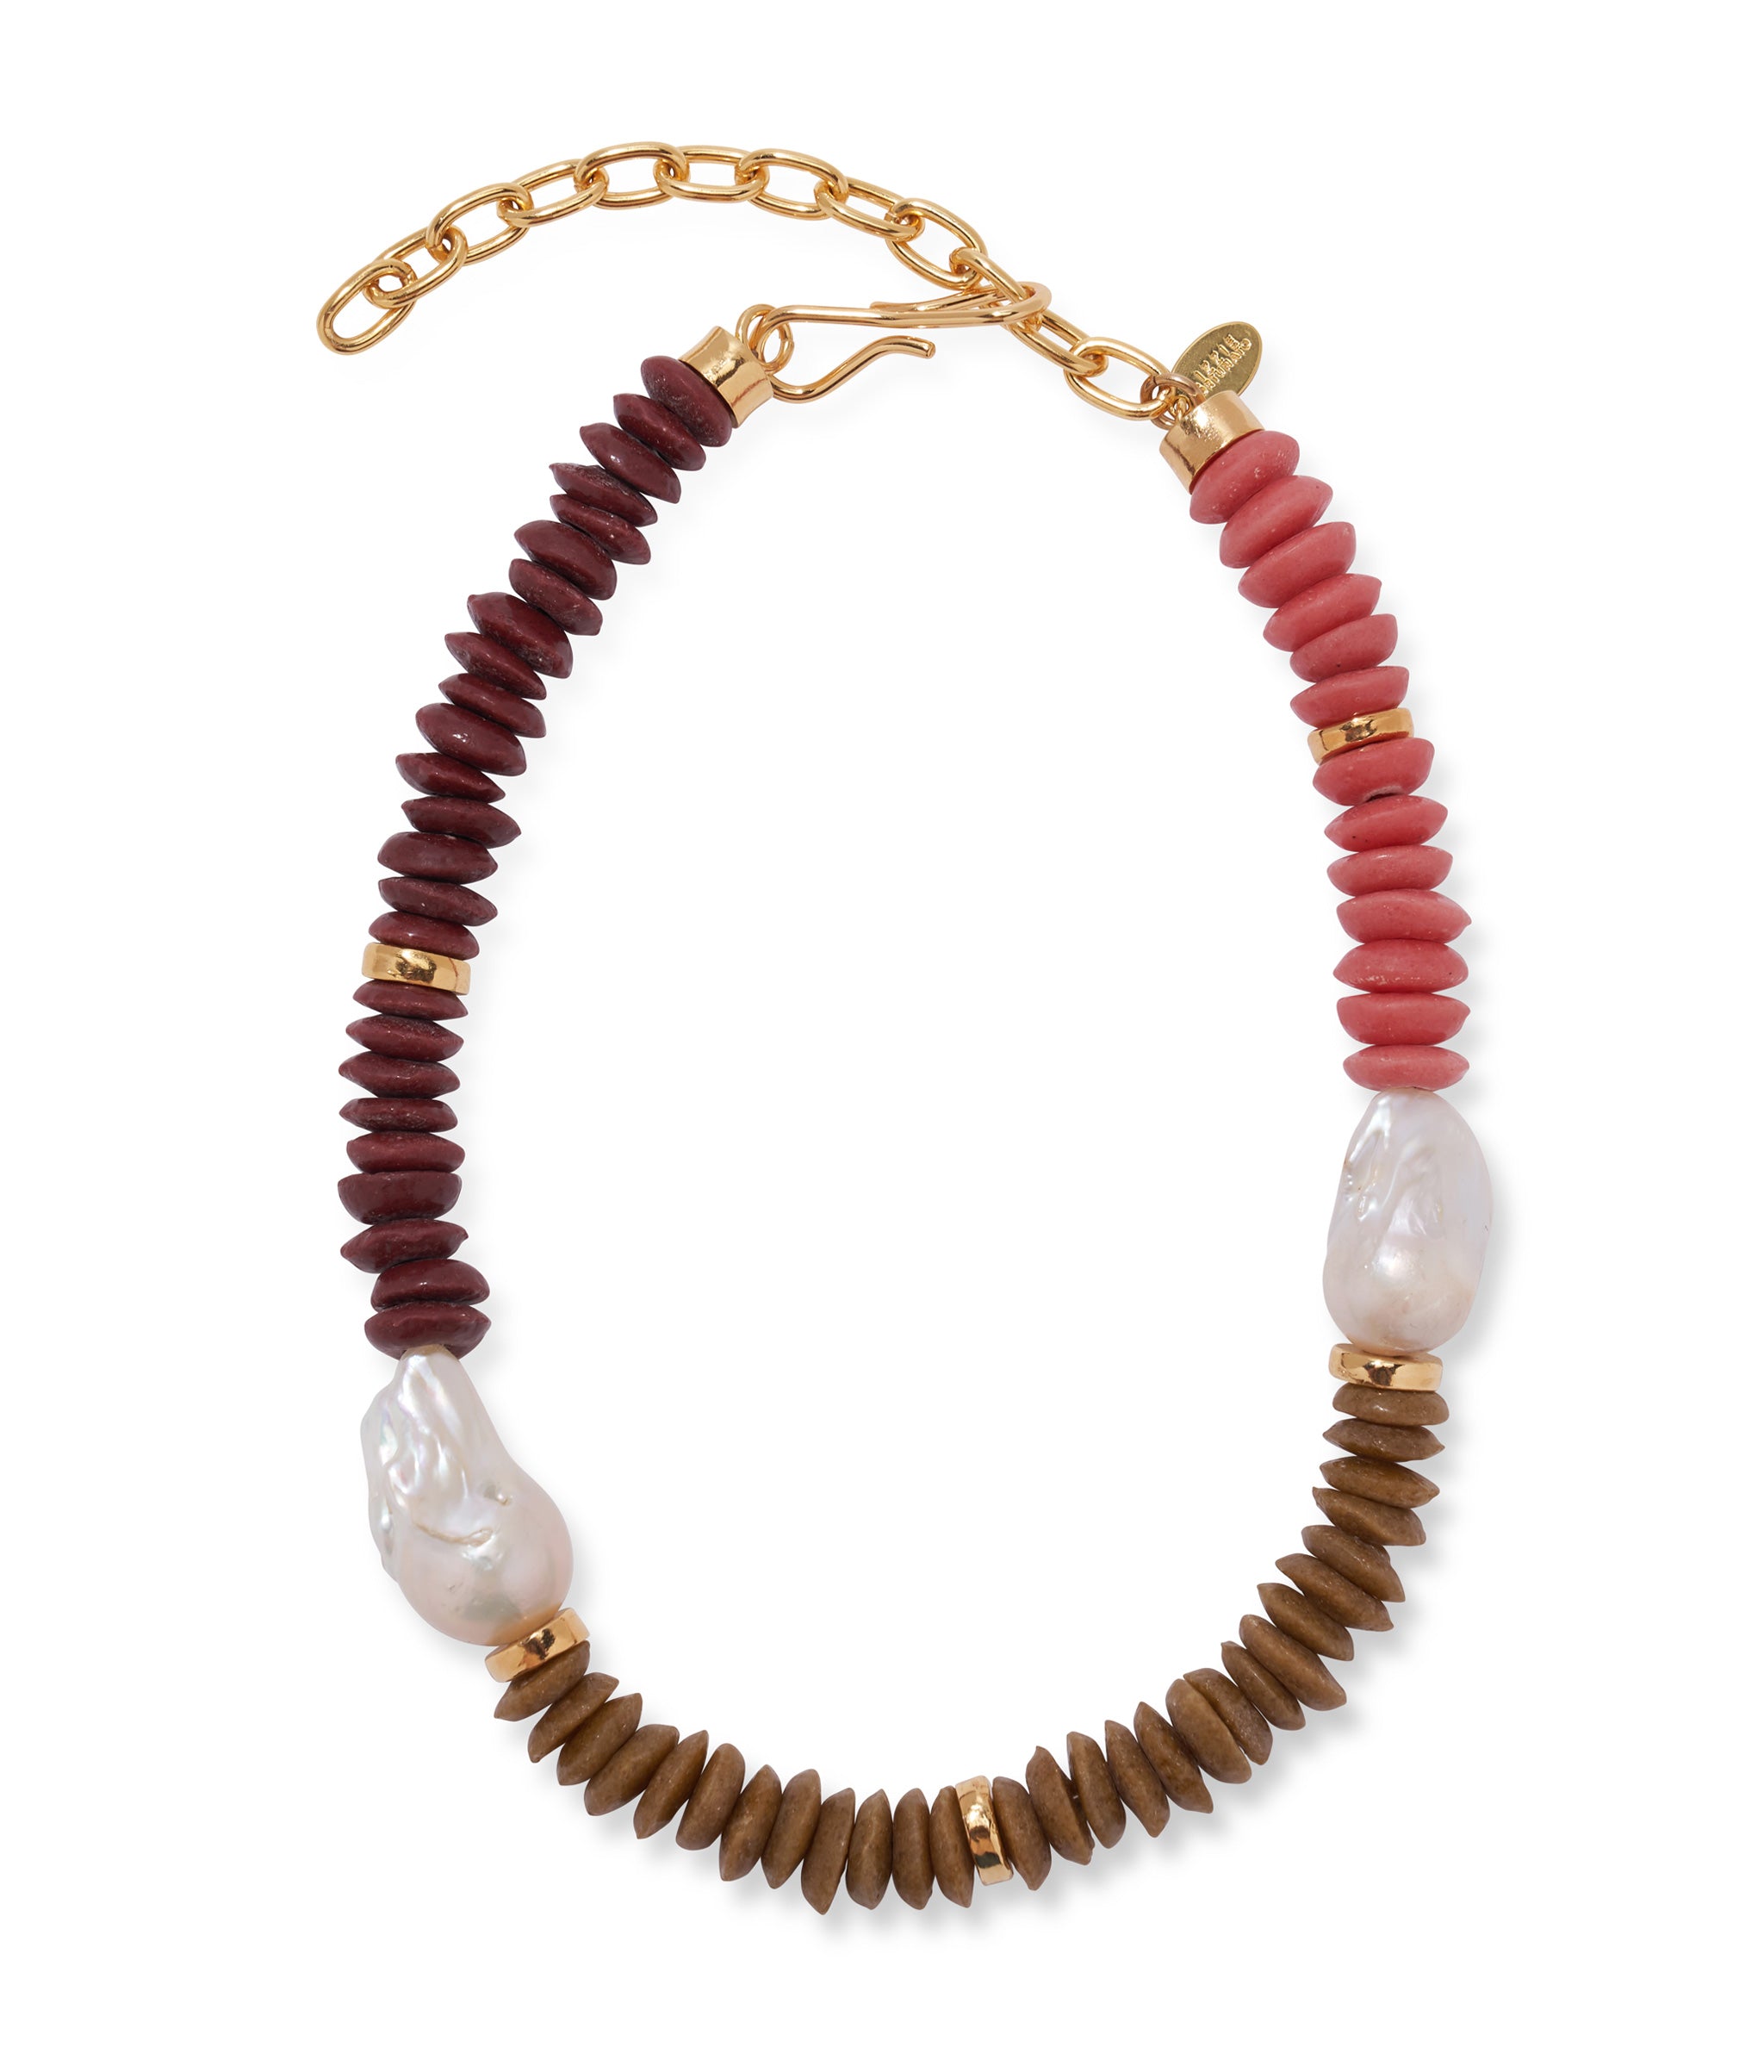 Tavira Necklace in Lichen. Color-blocked glass Ashanti beads in burgundy, dark tan and pink, with pearl accents.